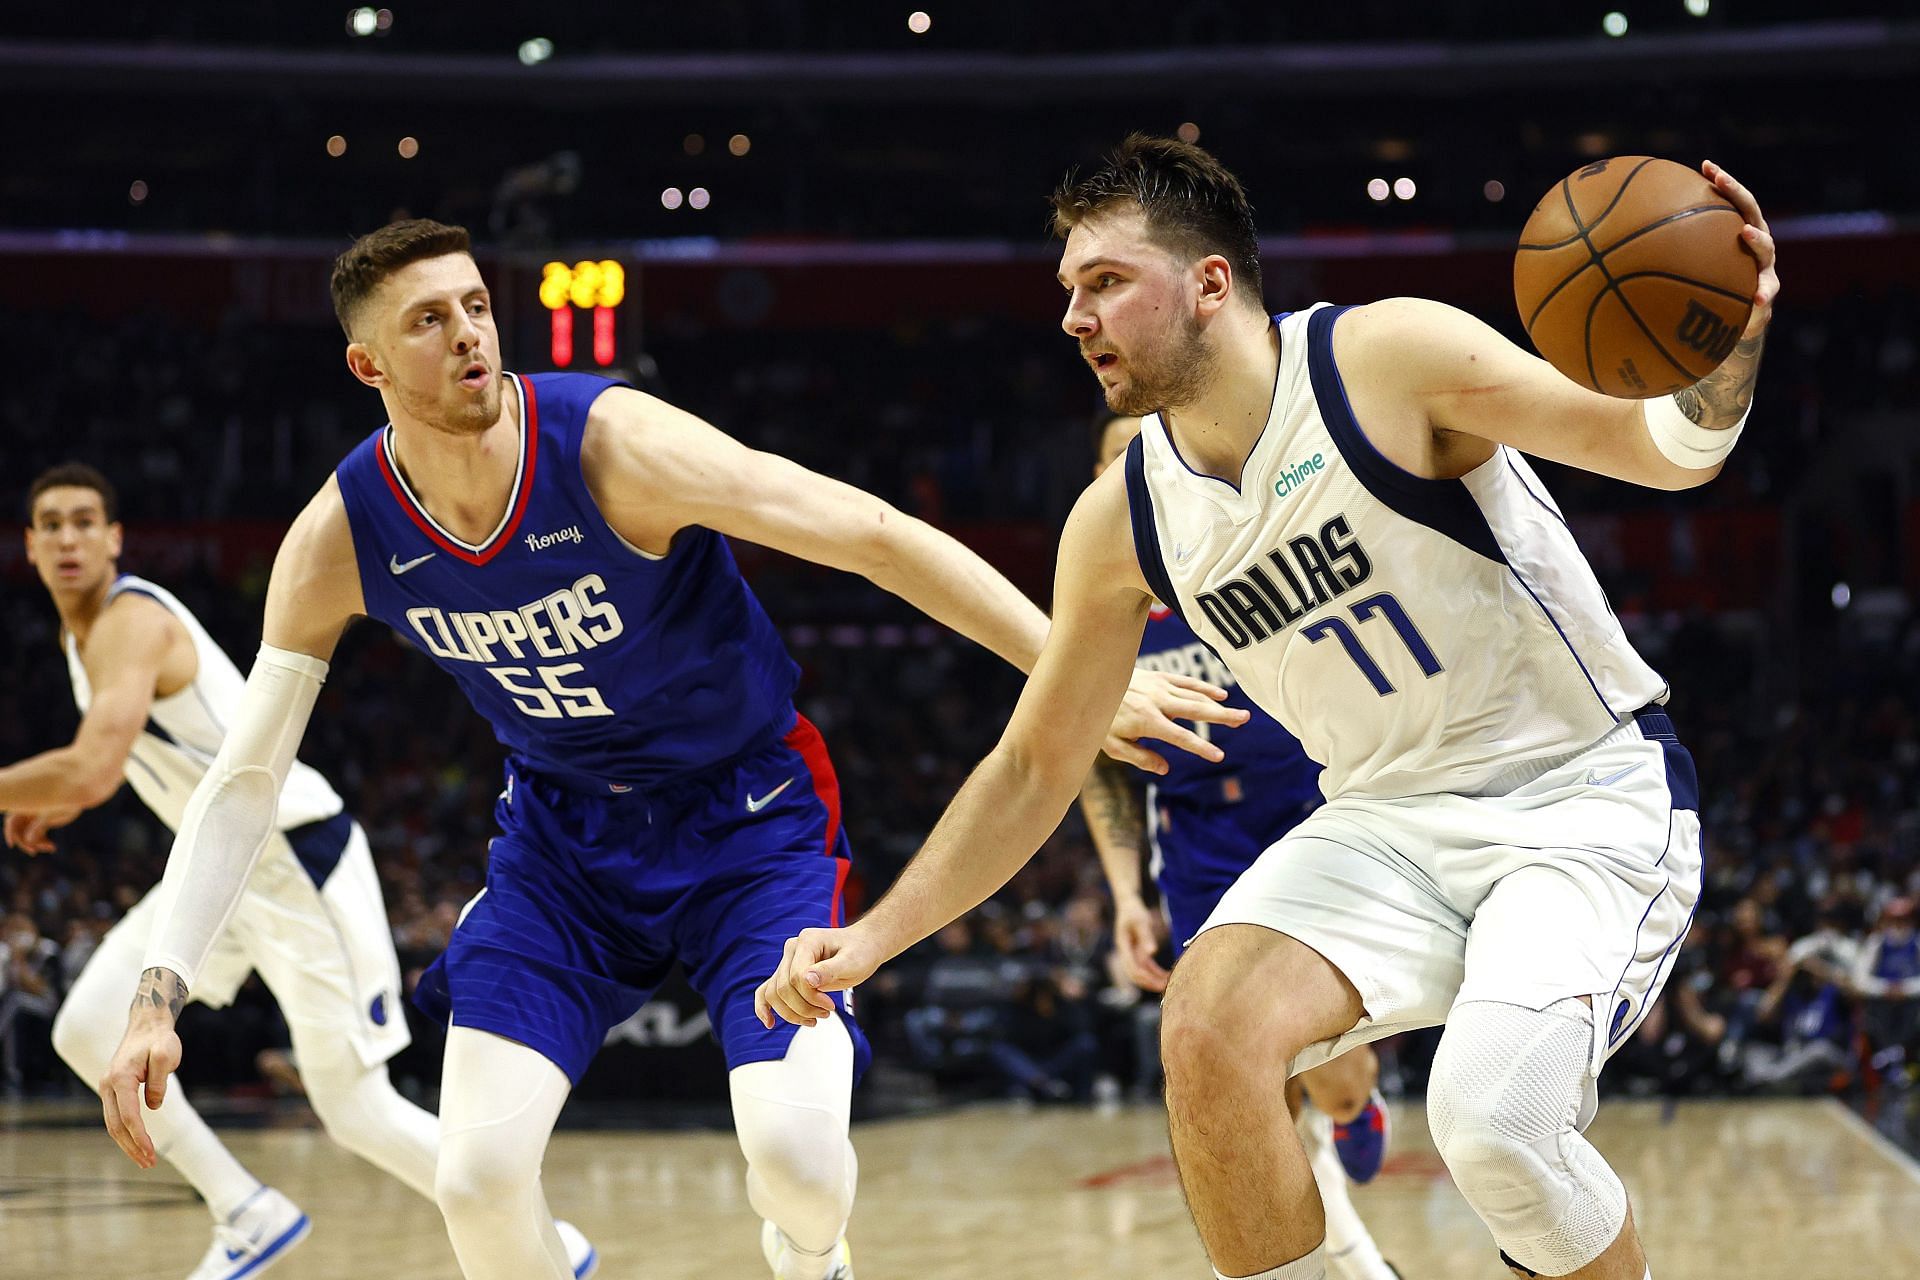 The Dallas Mavericks are 0-3 without Luka Doncic this season.